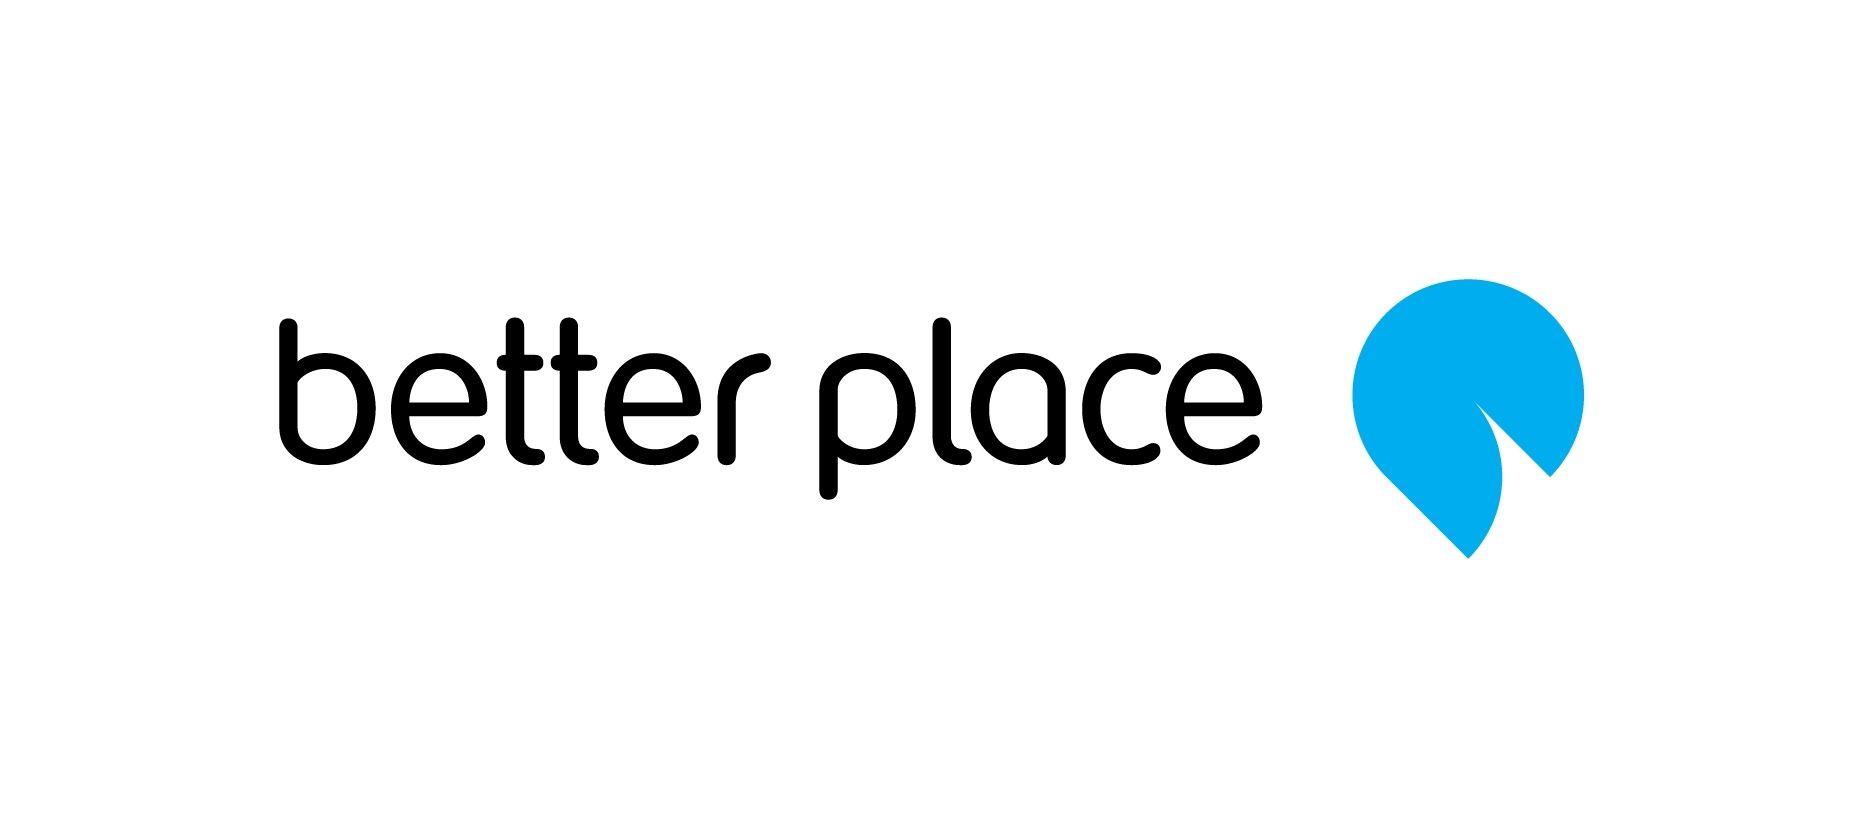 Place Logo - Looking for a font similar to the one used in the better place logo ...